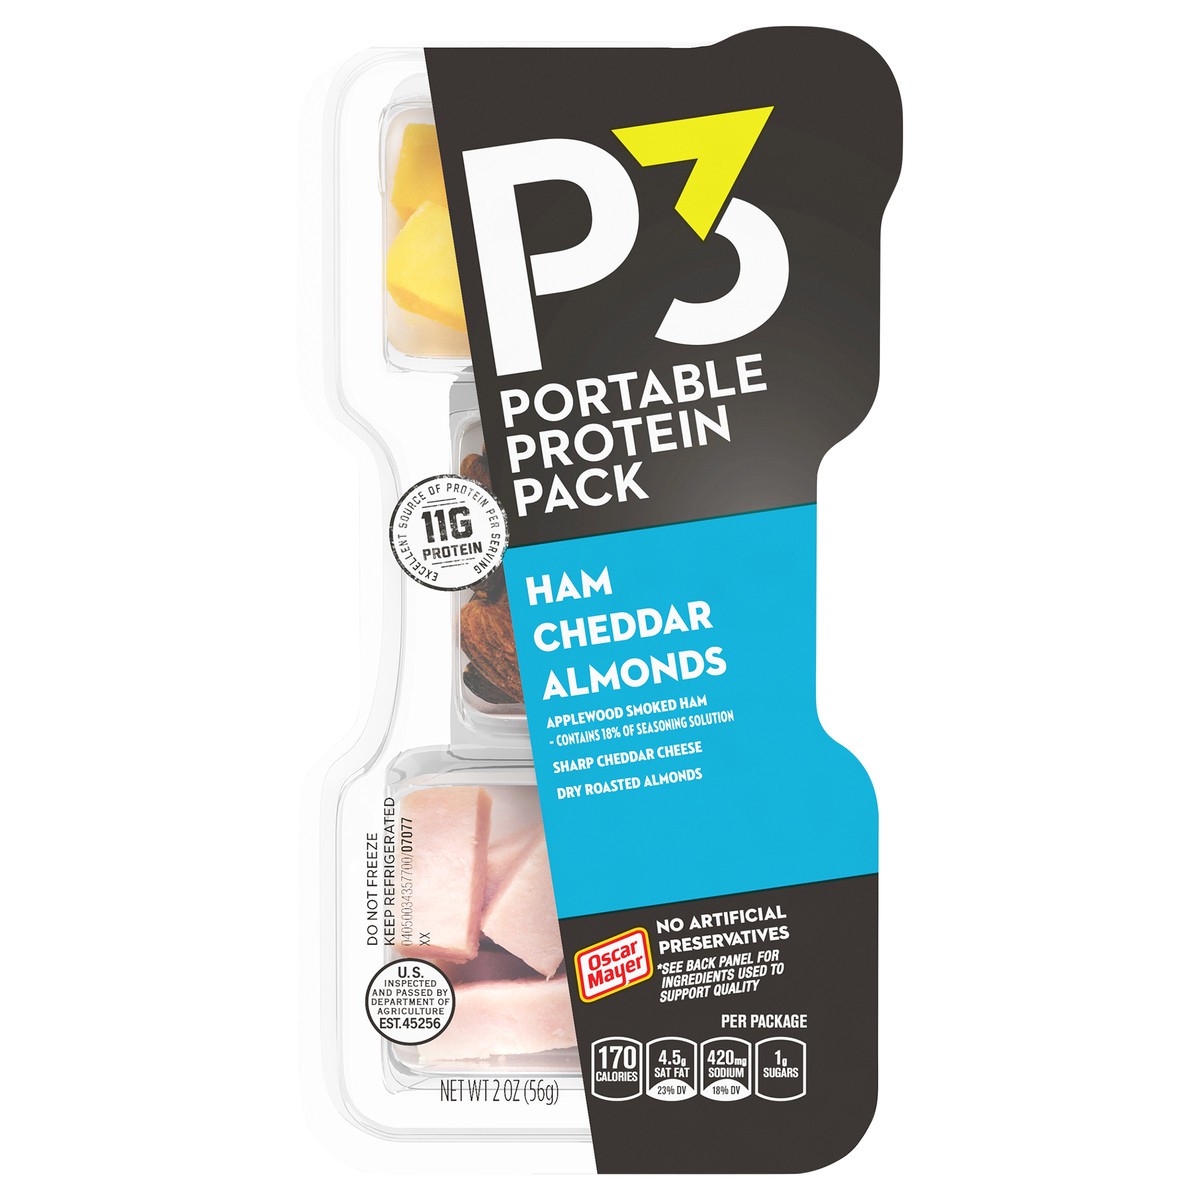 slide 1 of 9, P3 Portable Protein Snack Pack with Ham, Almonds & Cheddar Cheese, 2 oz Tray, 2 oz